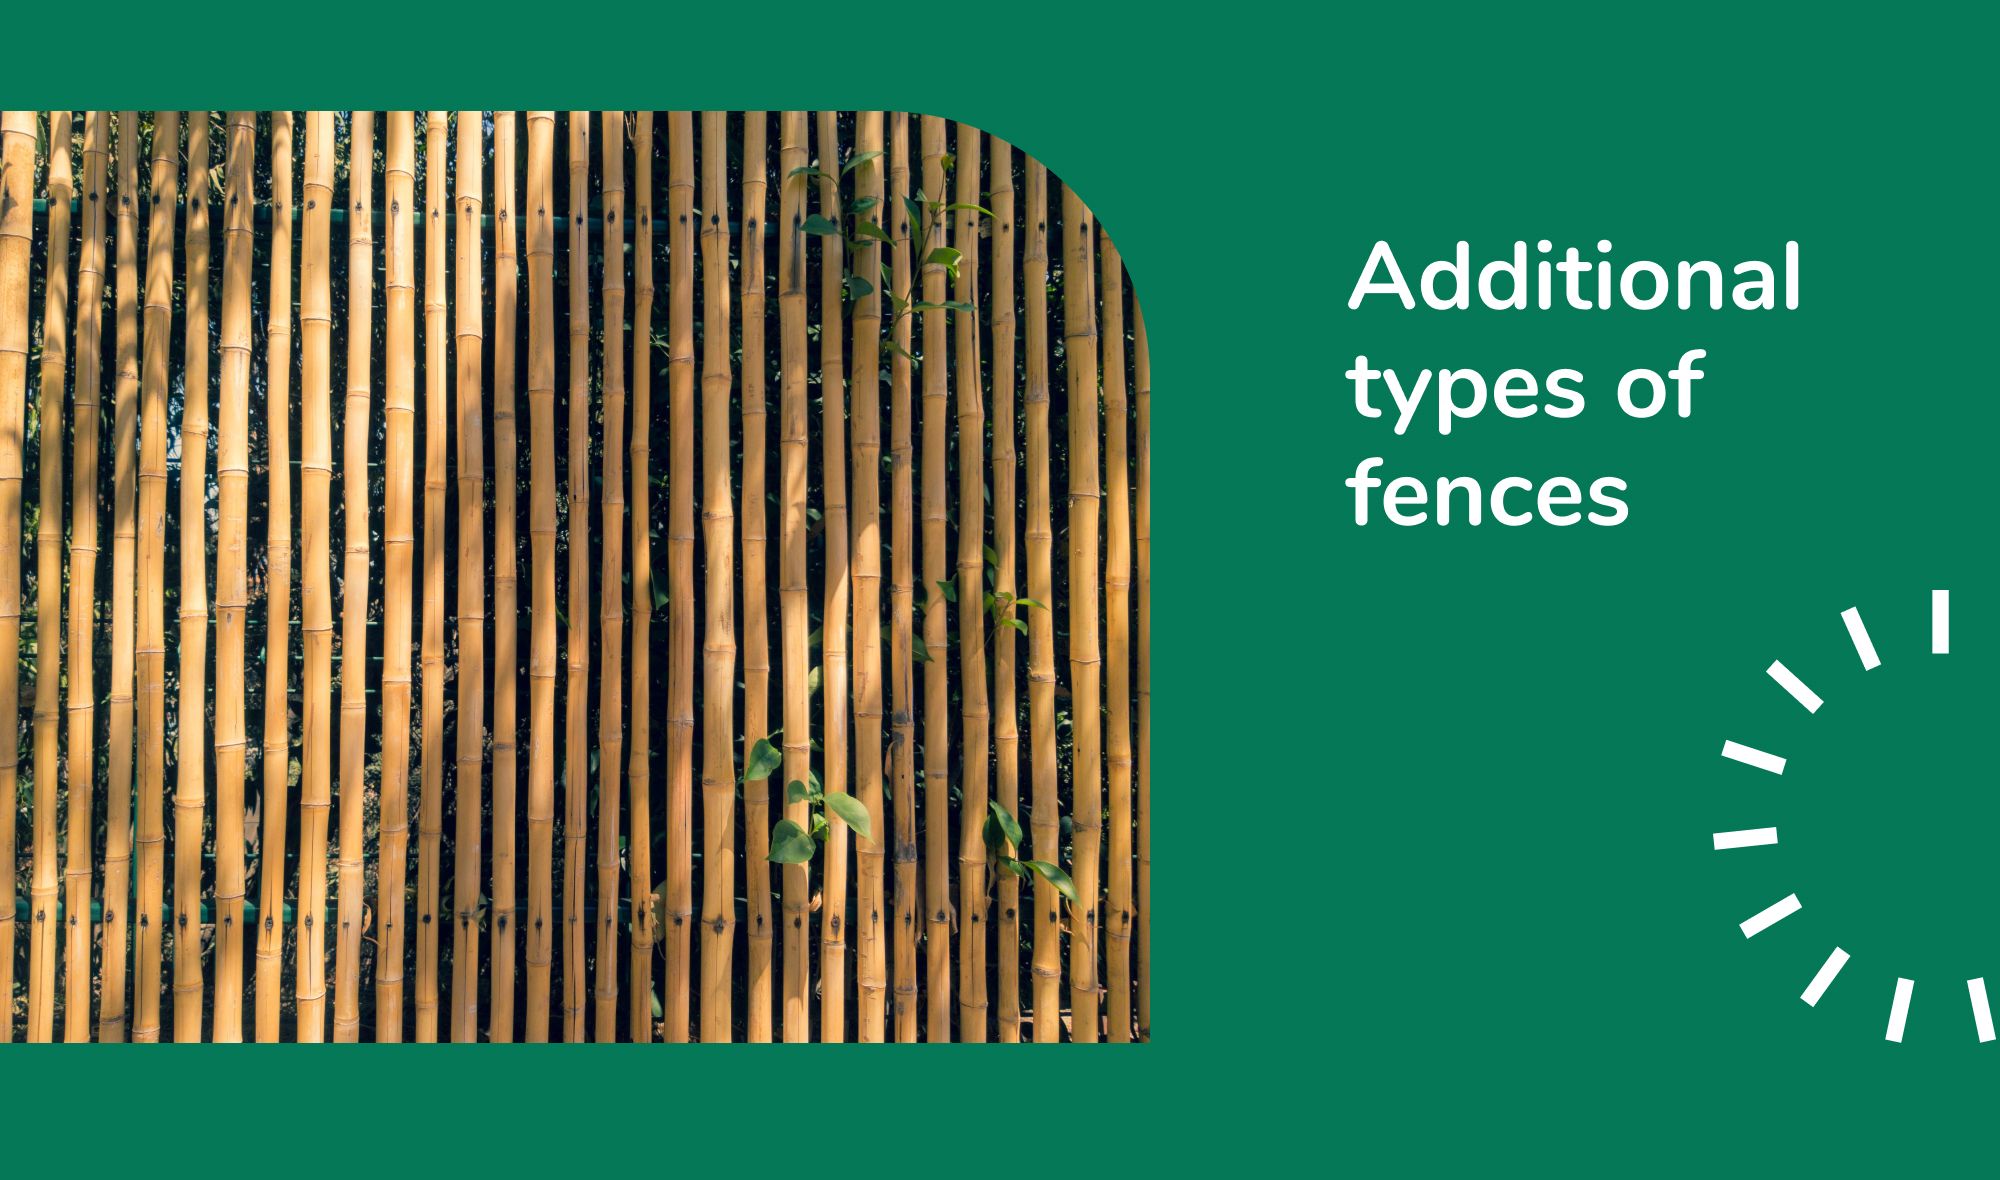 Additional types of fences, their features, and benefits